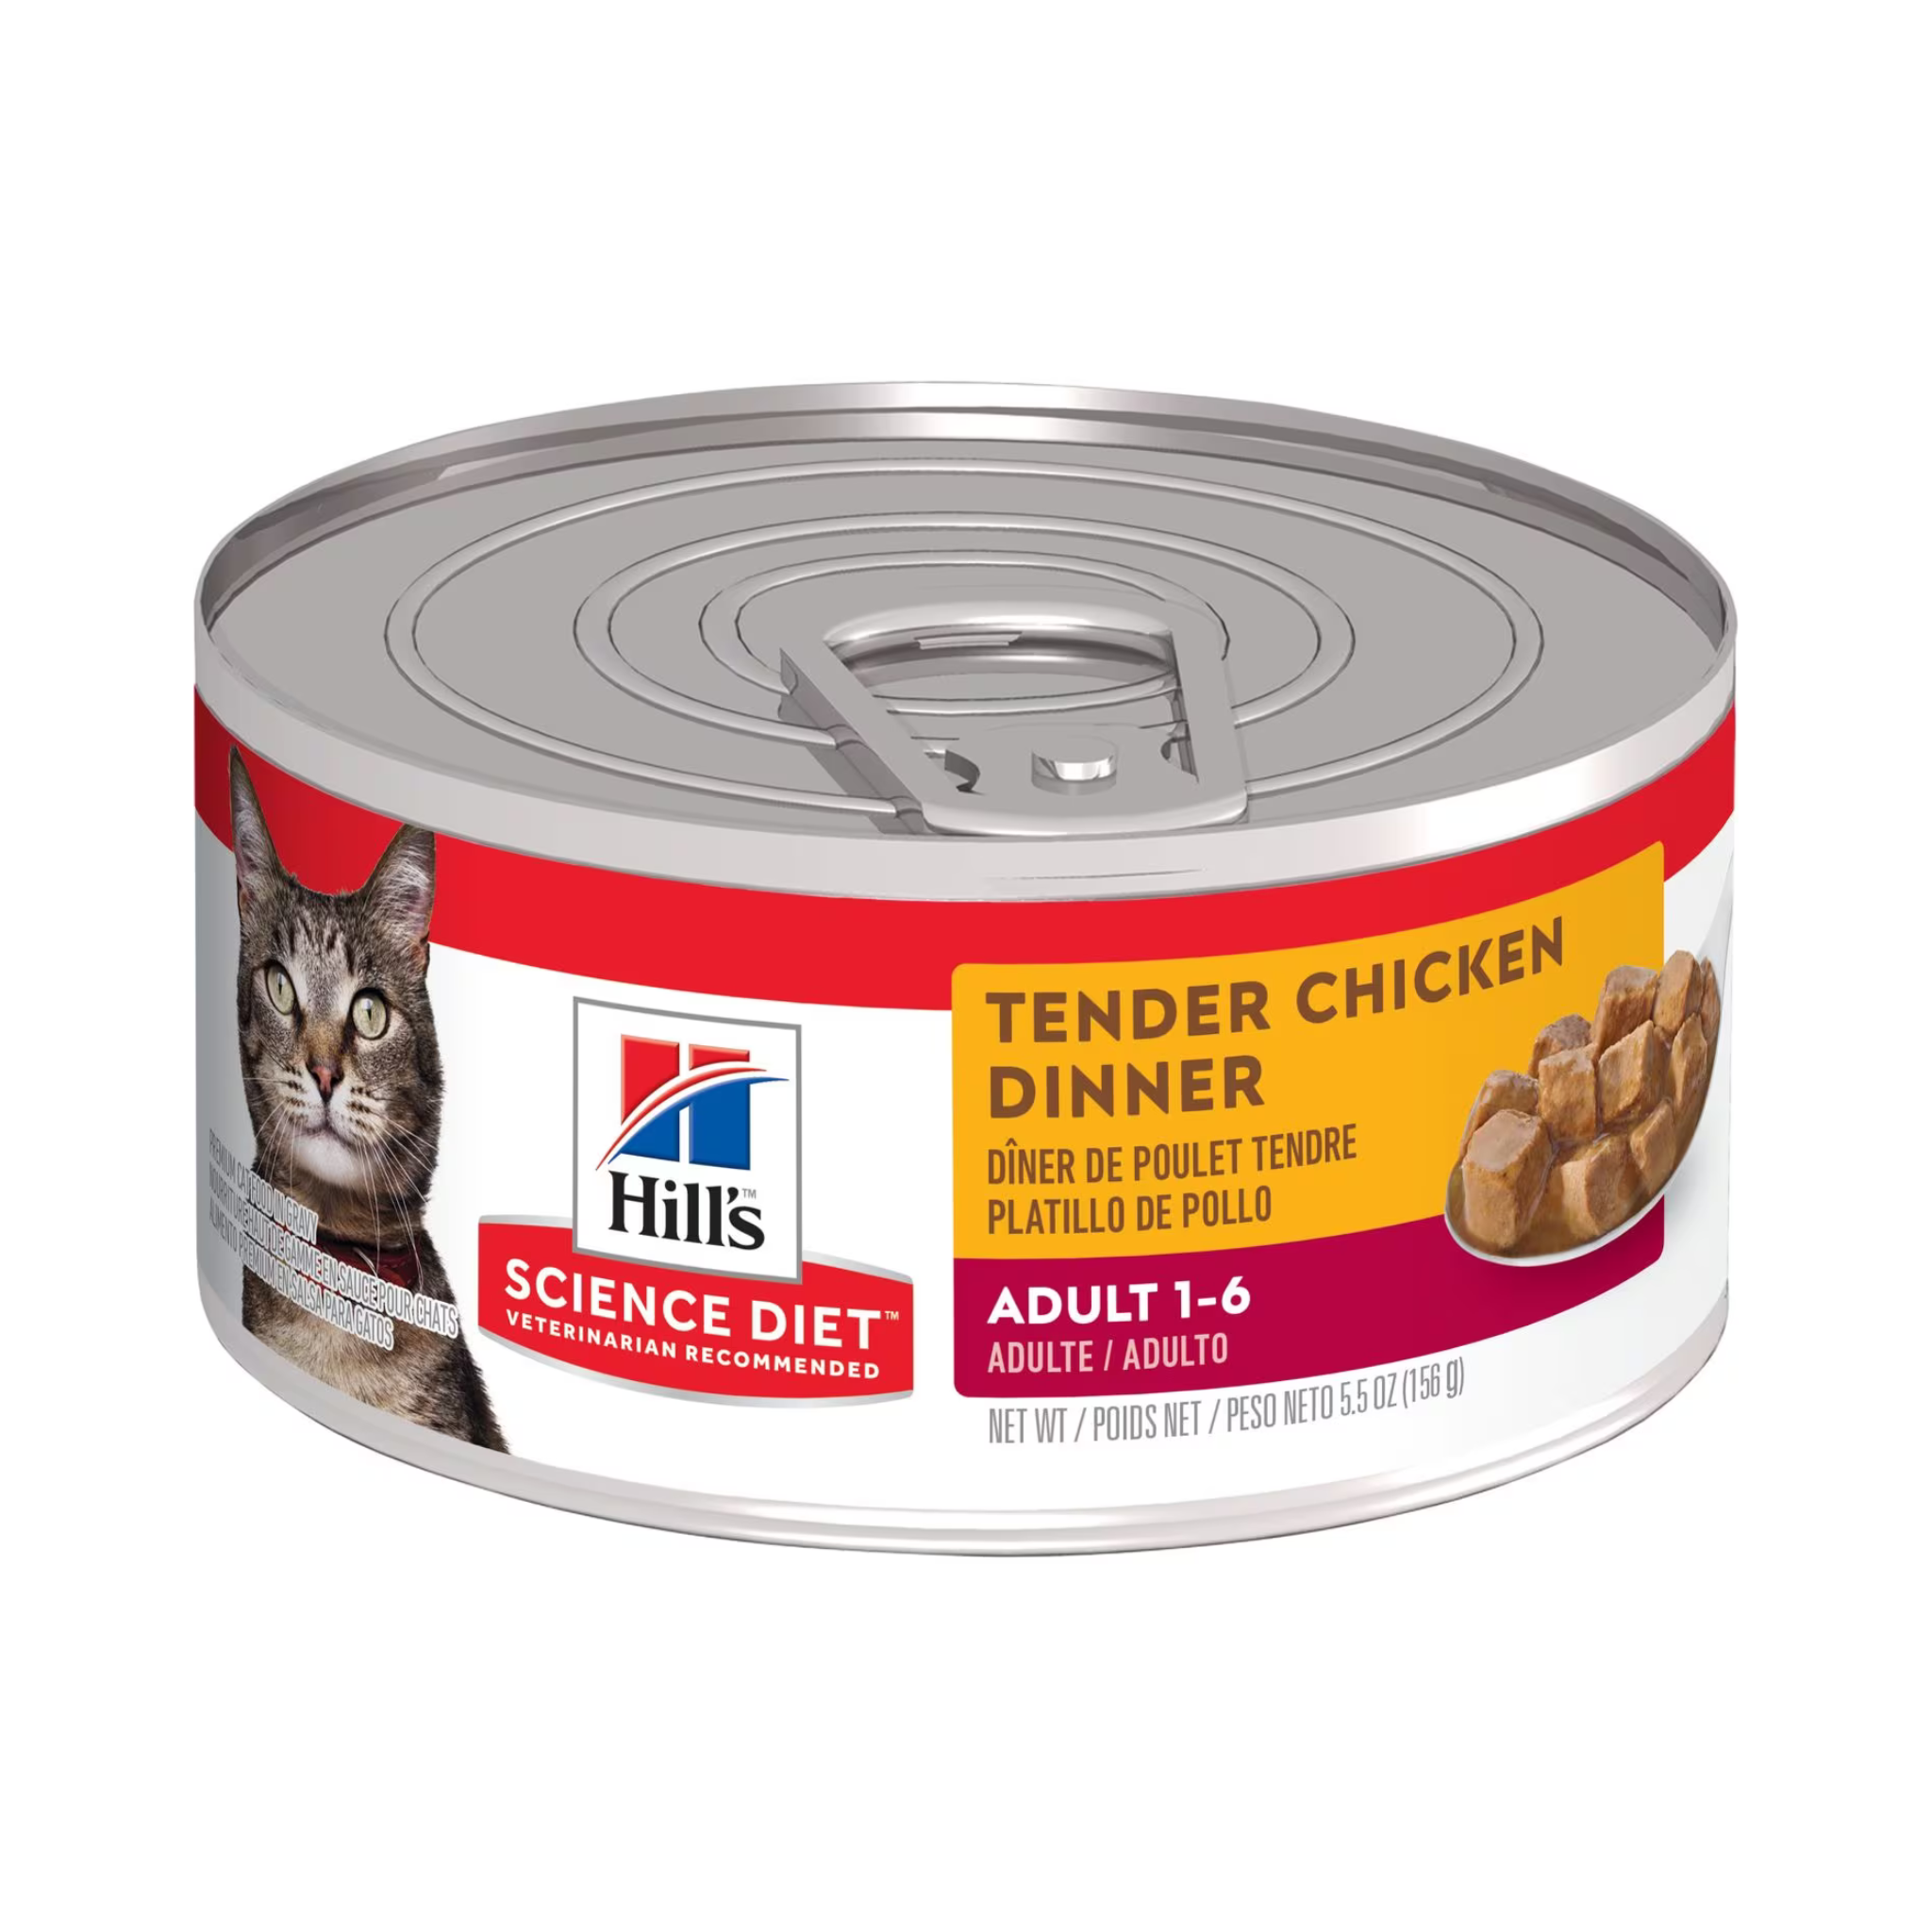 Hill's Science Diet Tender Chicken Dinner Adult Cat Canned